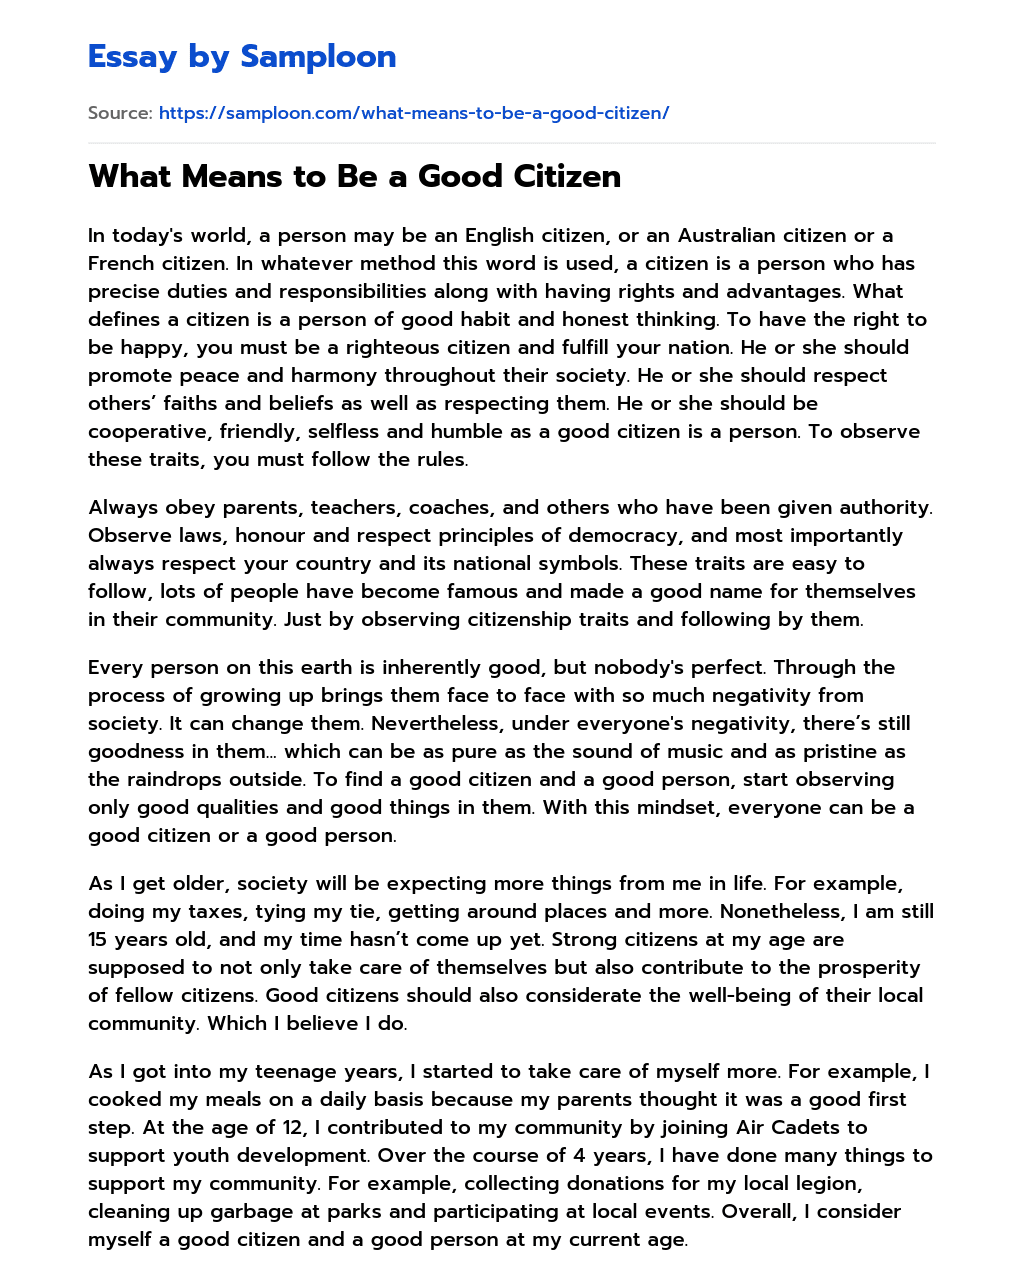 What Means to Be a Good Citizen essay